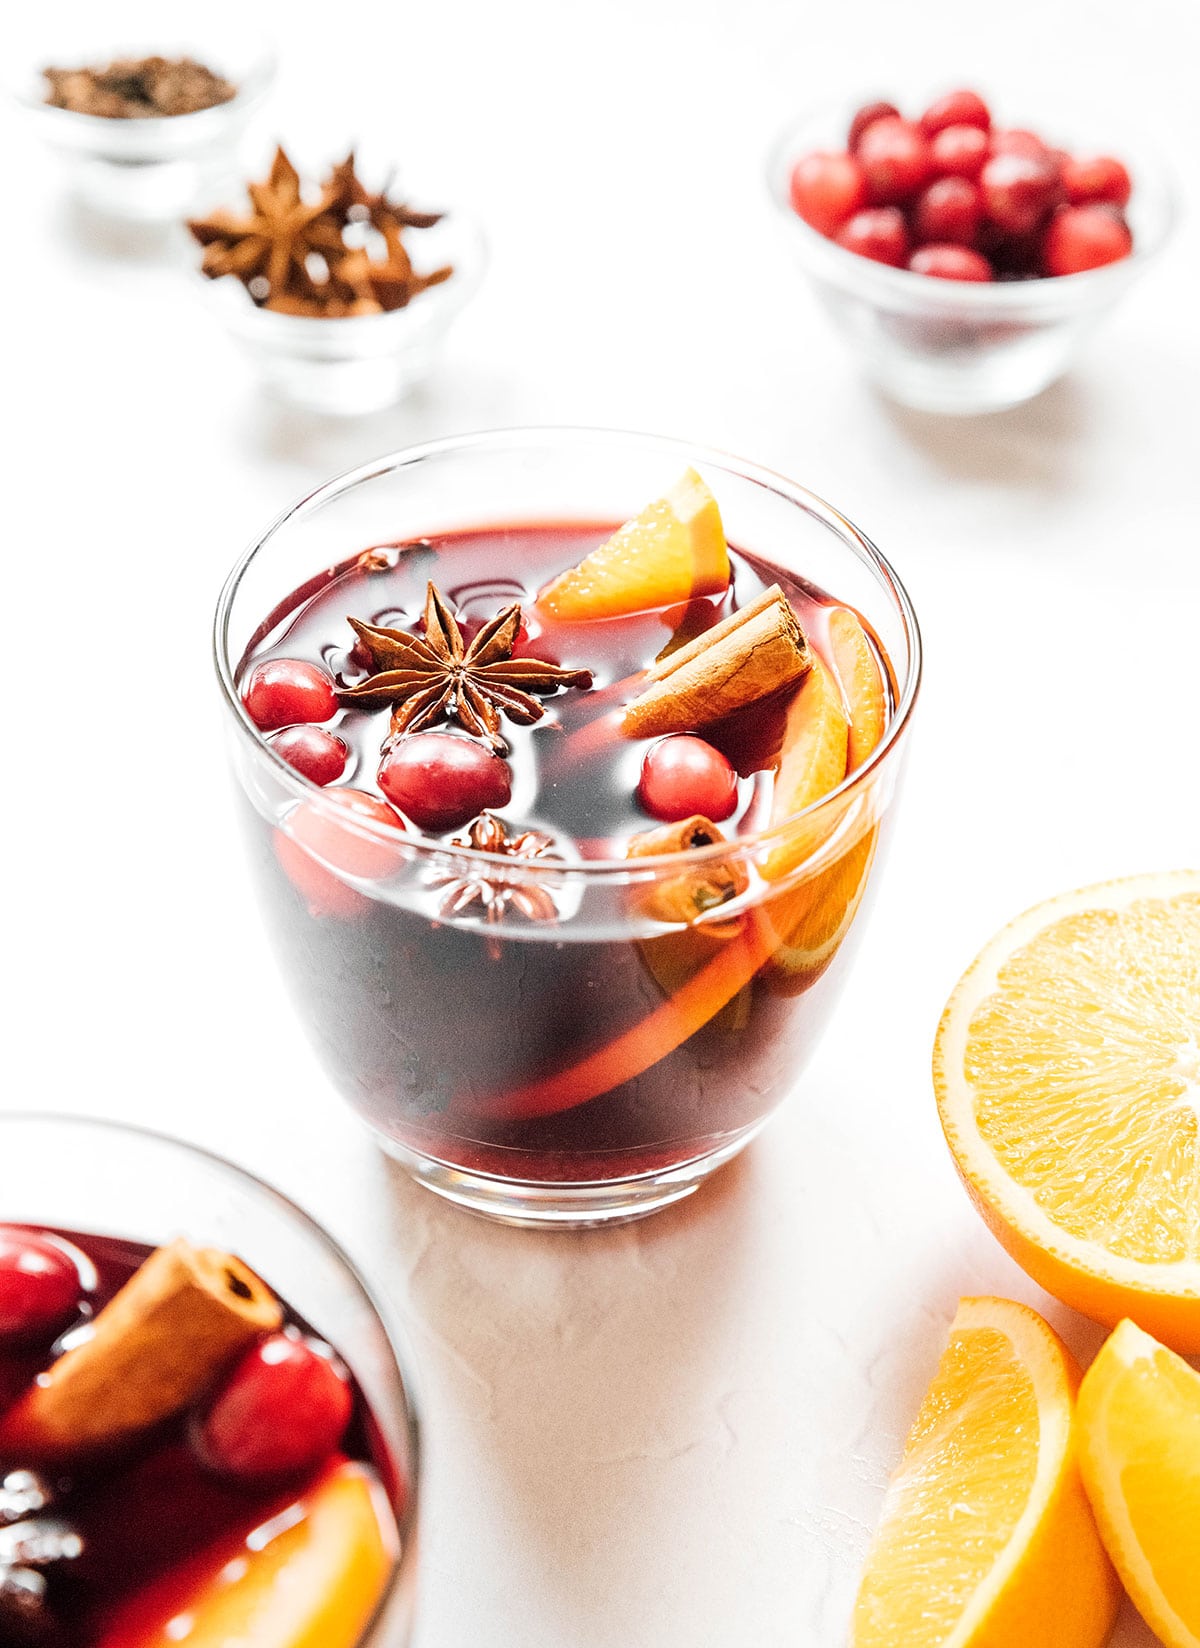 A short glass filled with gluhwein and garnished with orange slices, cinnamon sticks, star anise, and cranberries